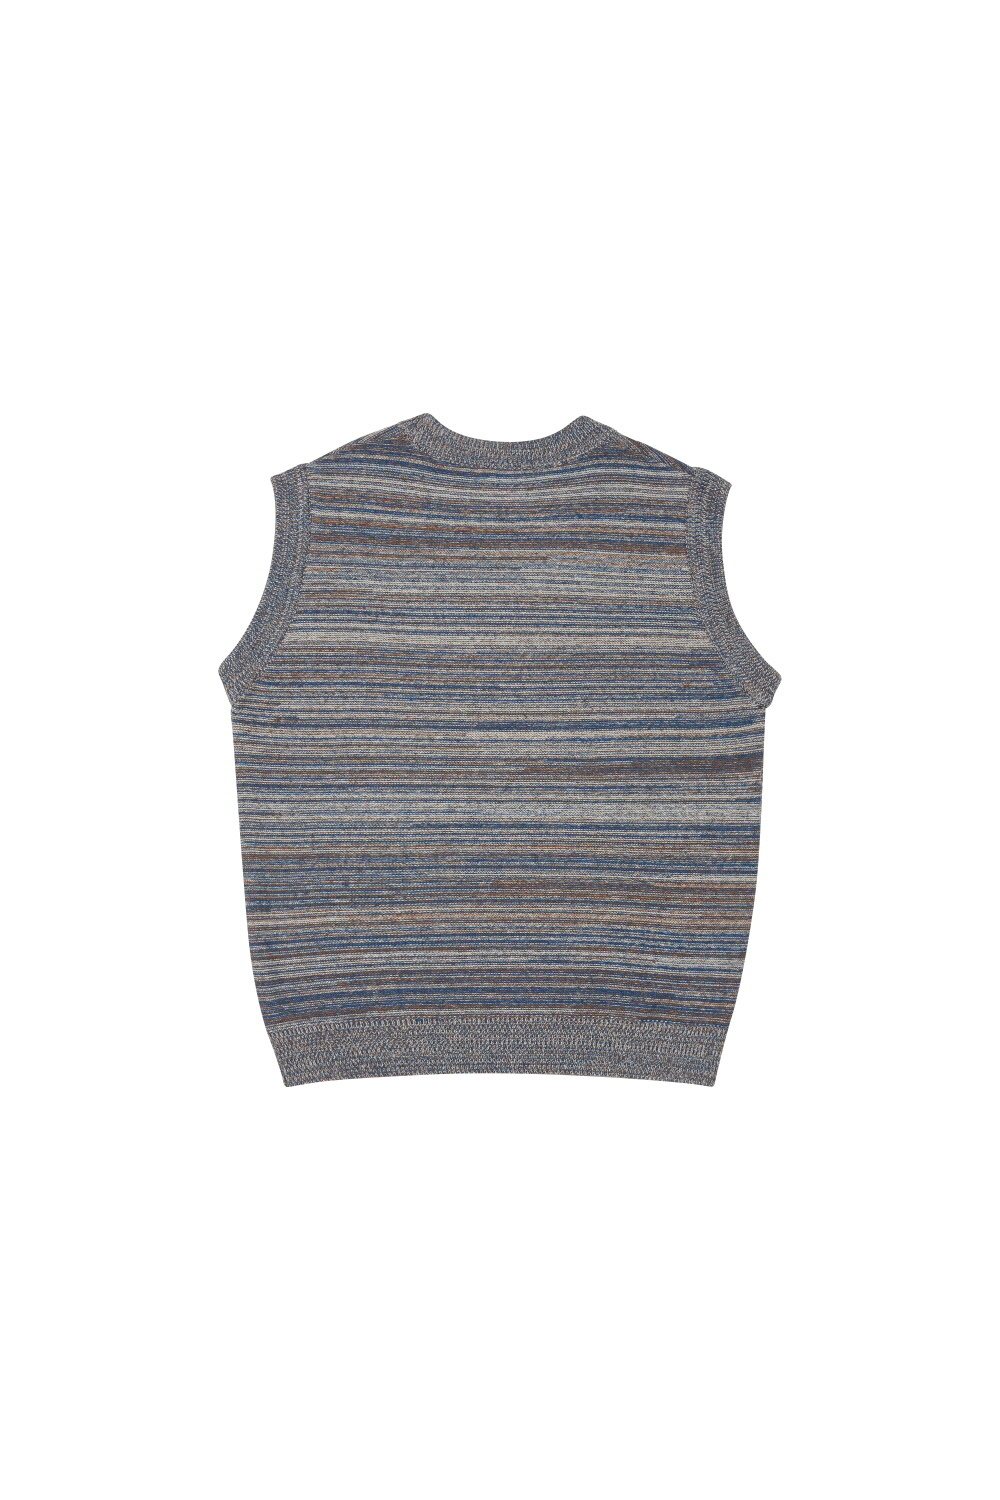 sleeveless charcoal color image-S19L4